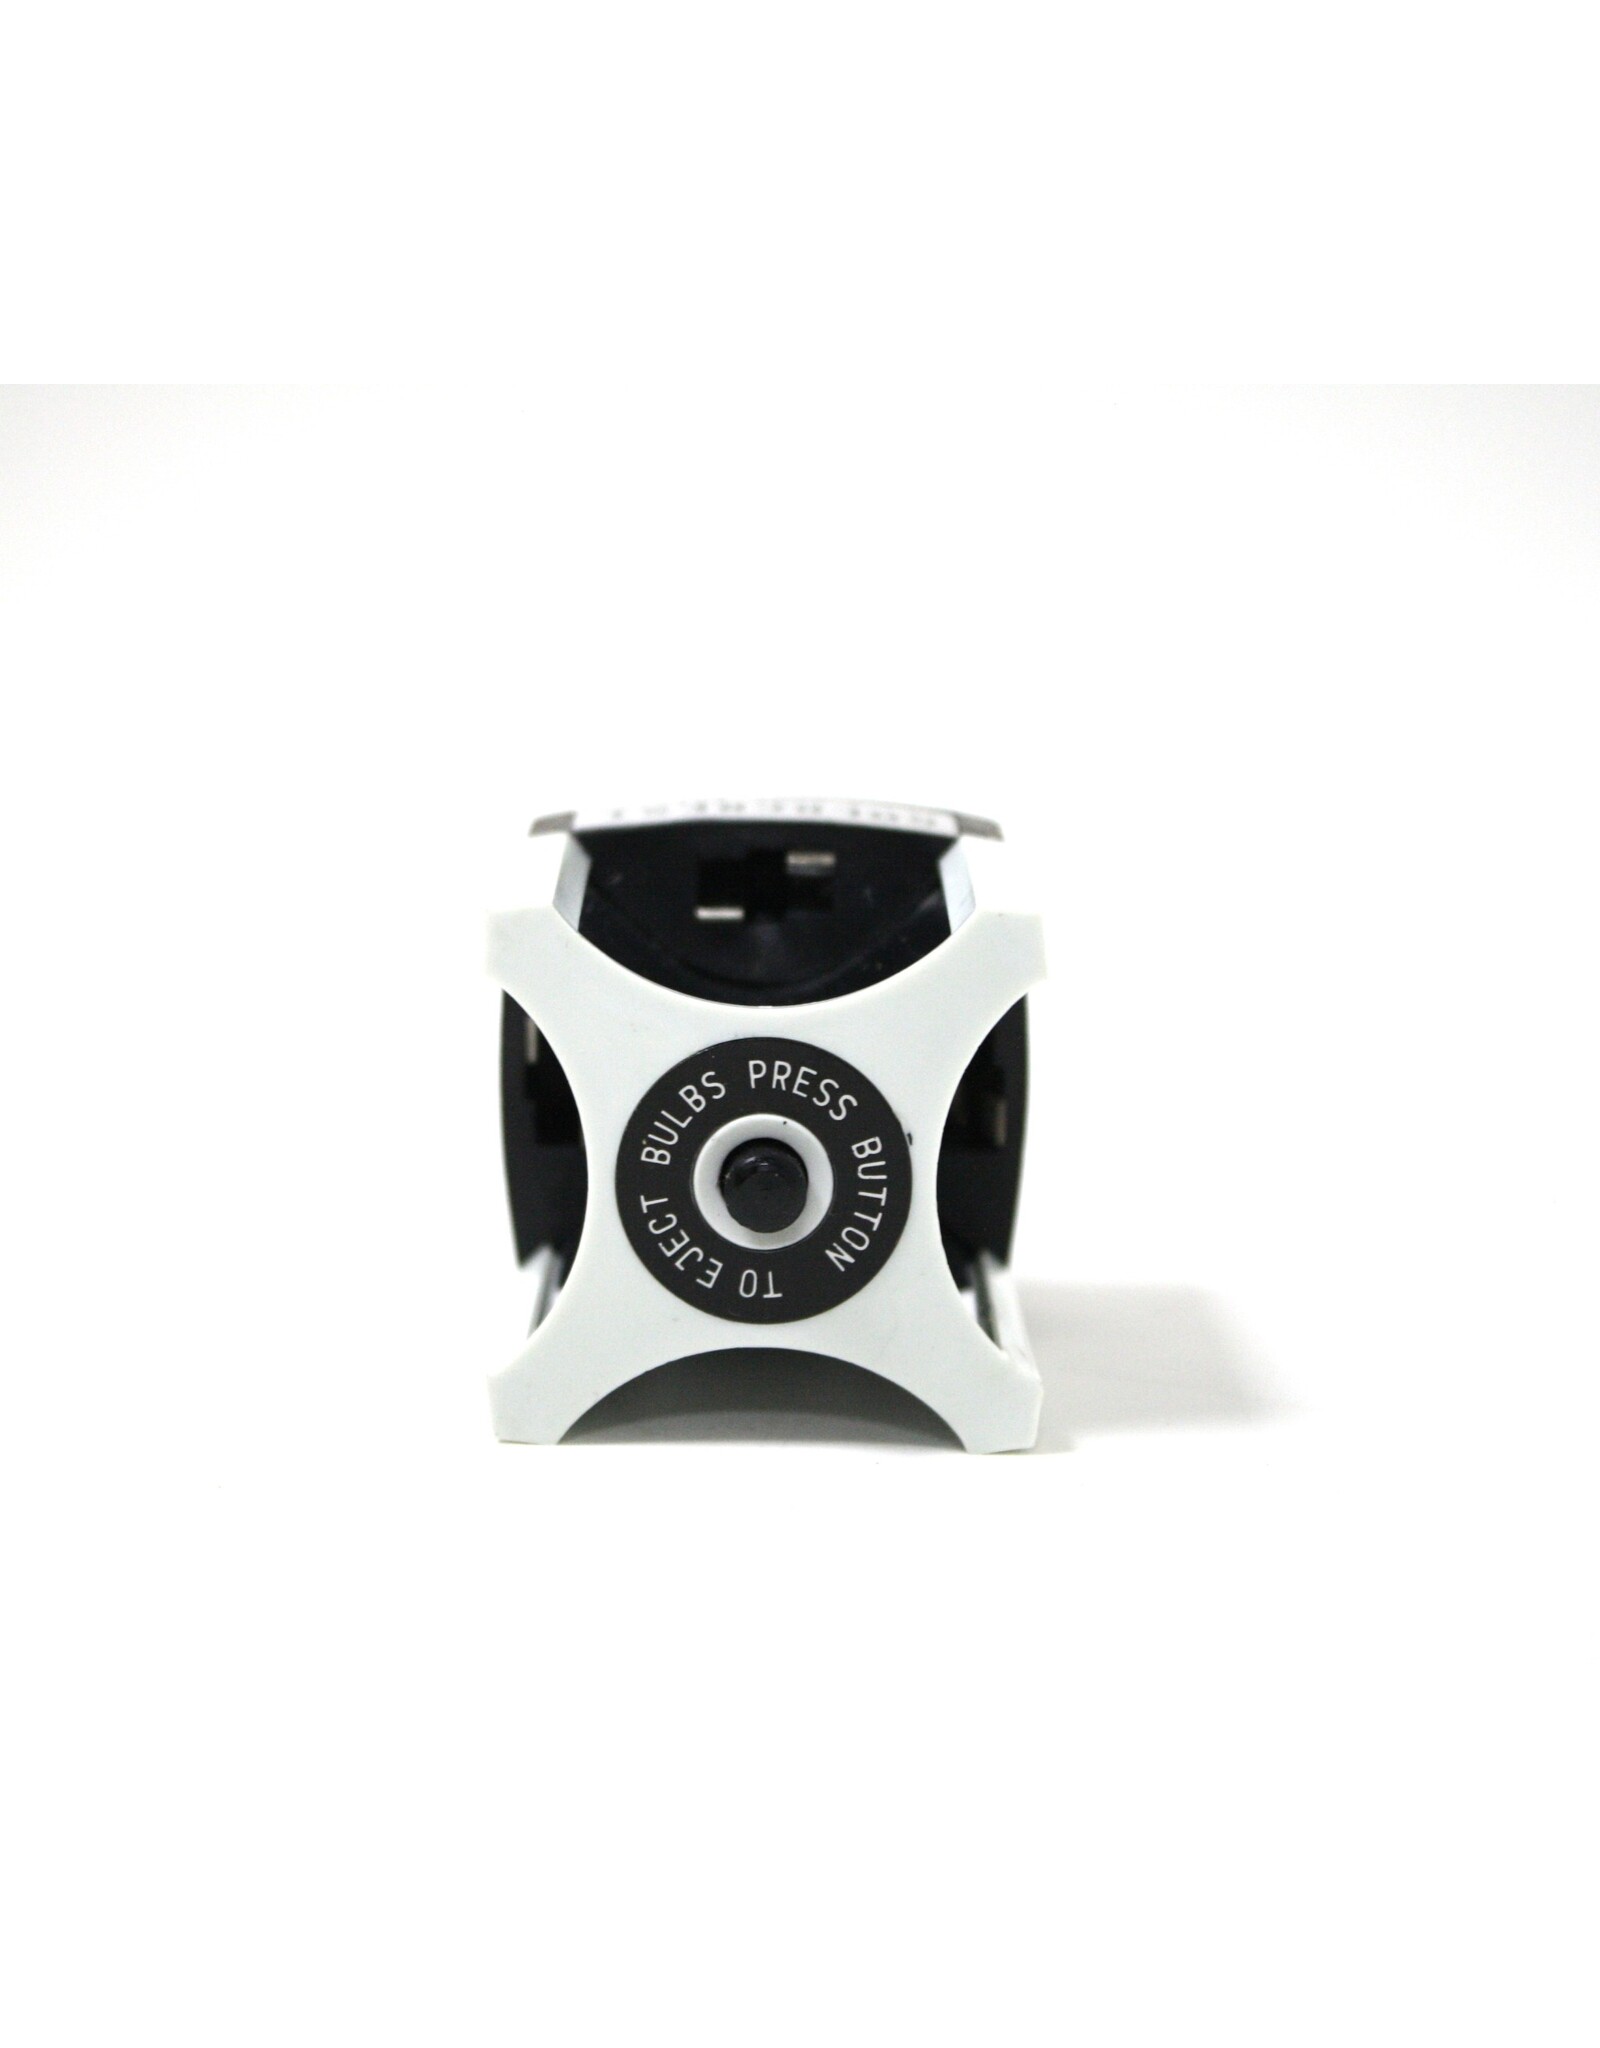 Goldcrest Automatic Ag 1-3 Cube Adapter